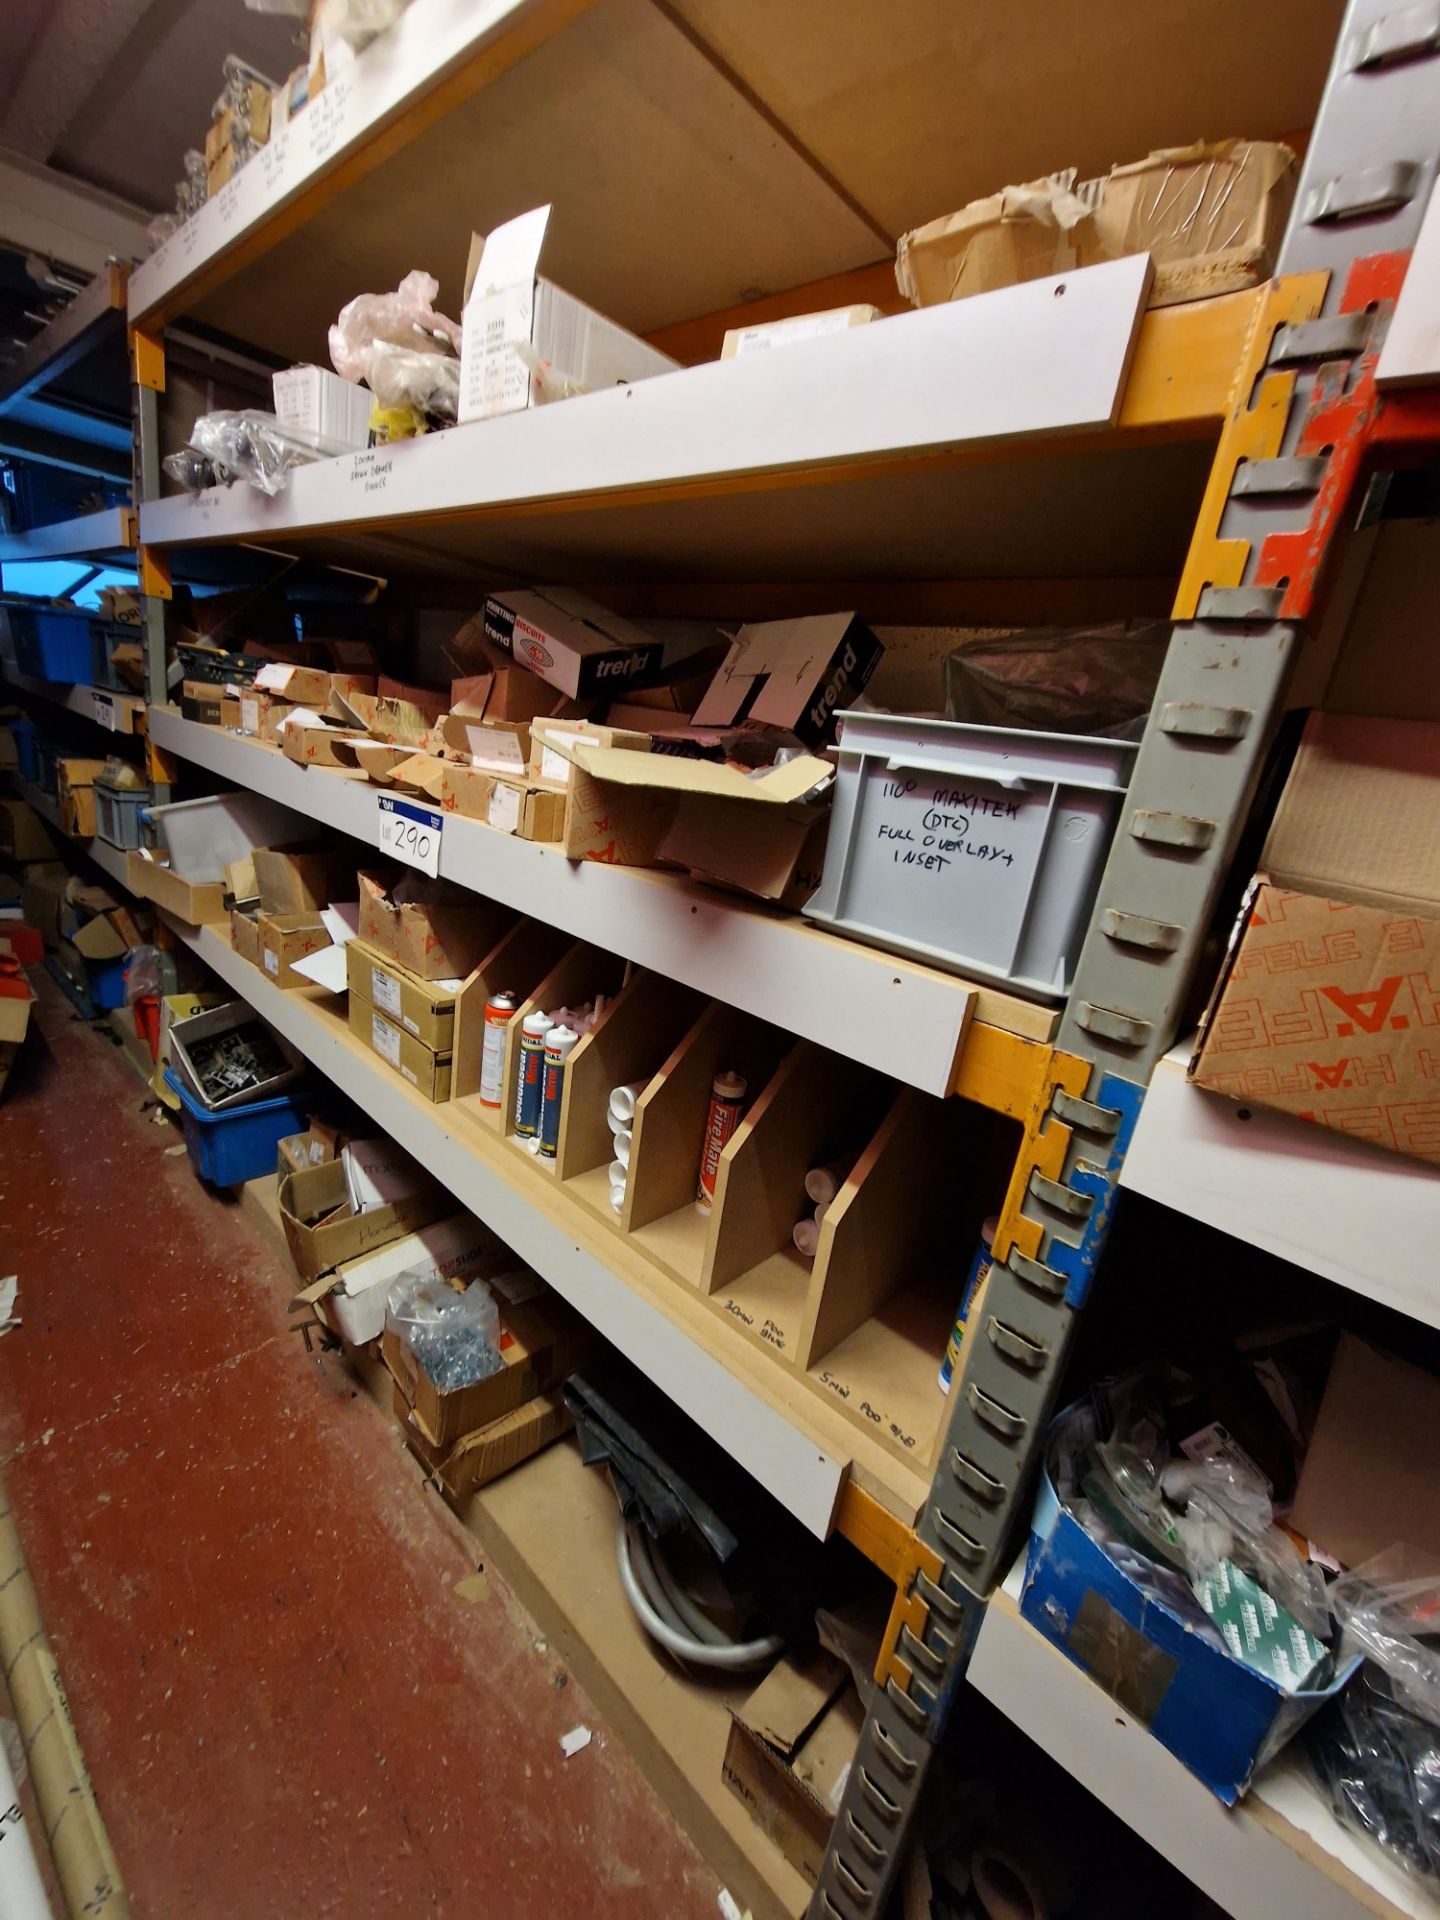 Contents to One Bay of Racking, including Fixtures, Fittings, Bolts, Drawer Runners, Bar Legs, - Image 2 of 32